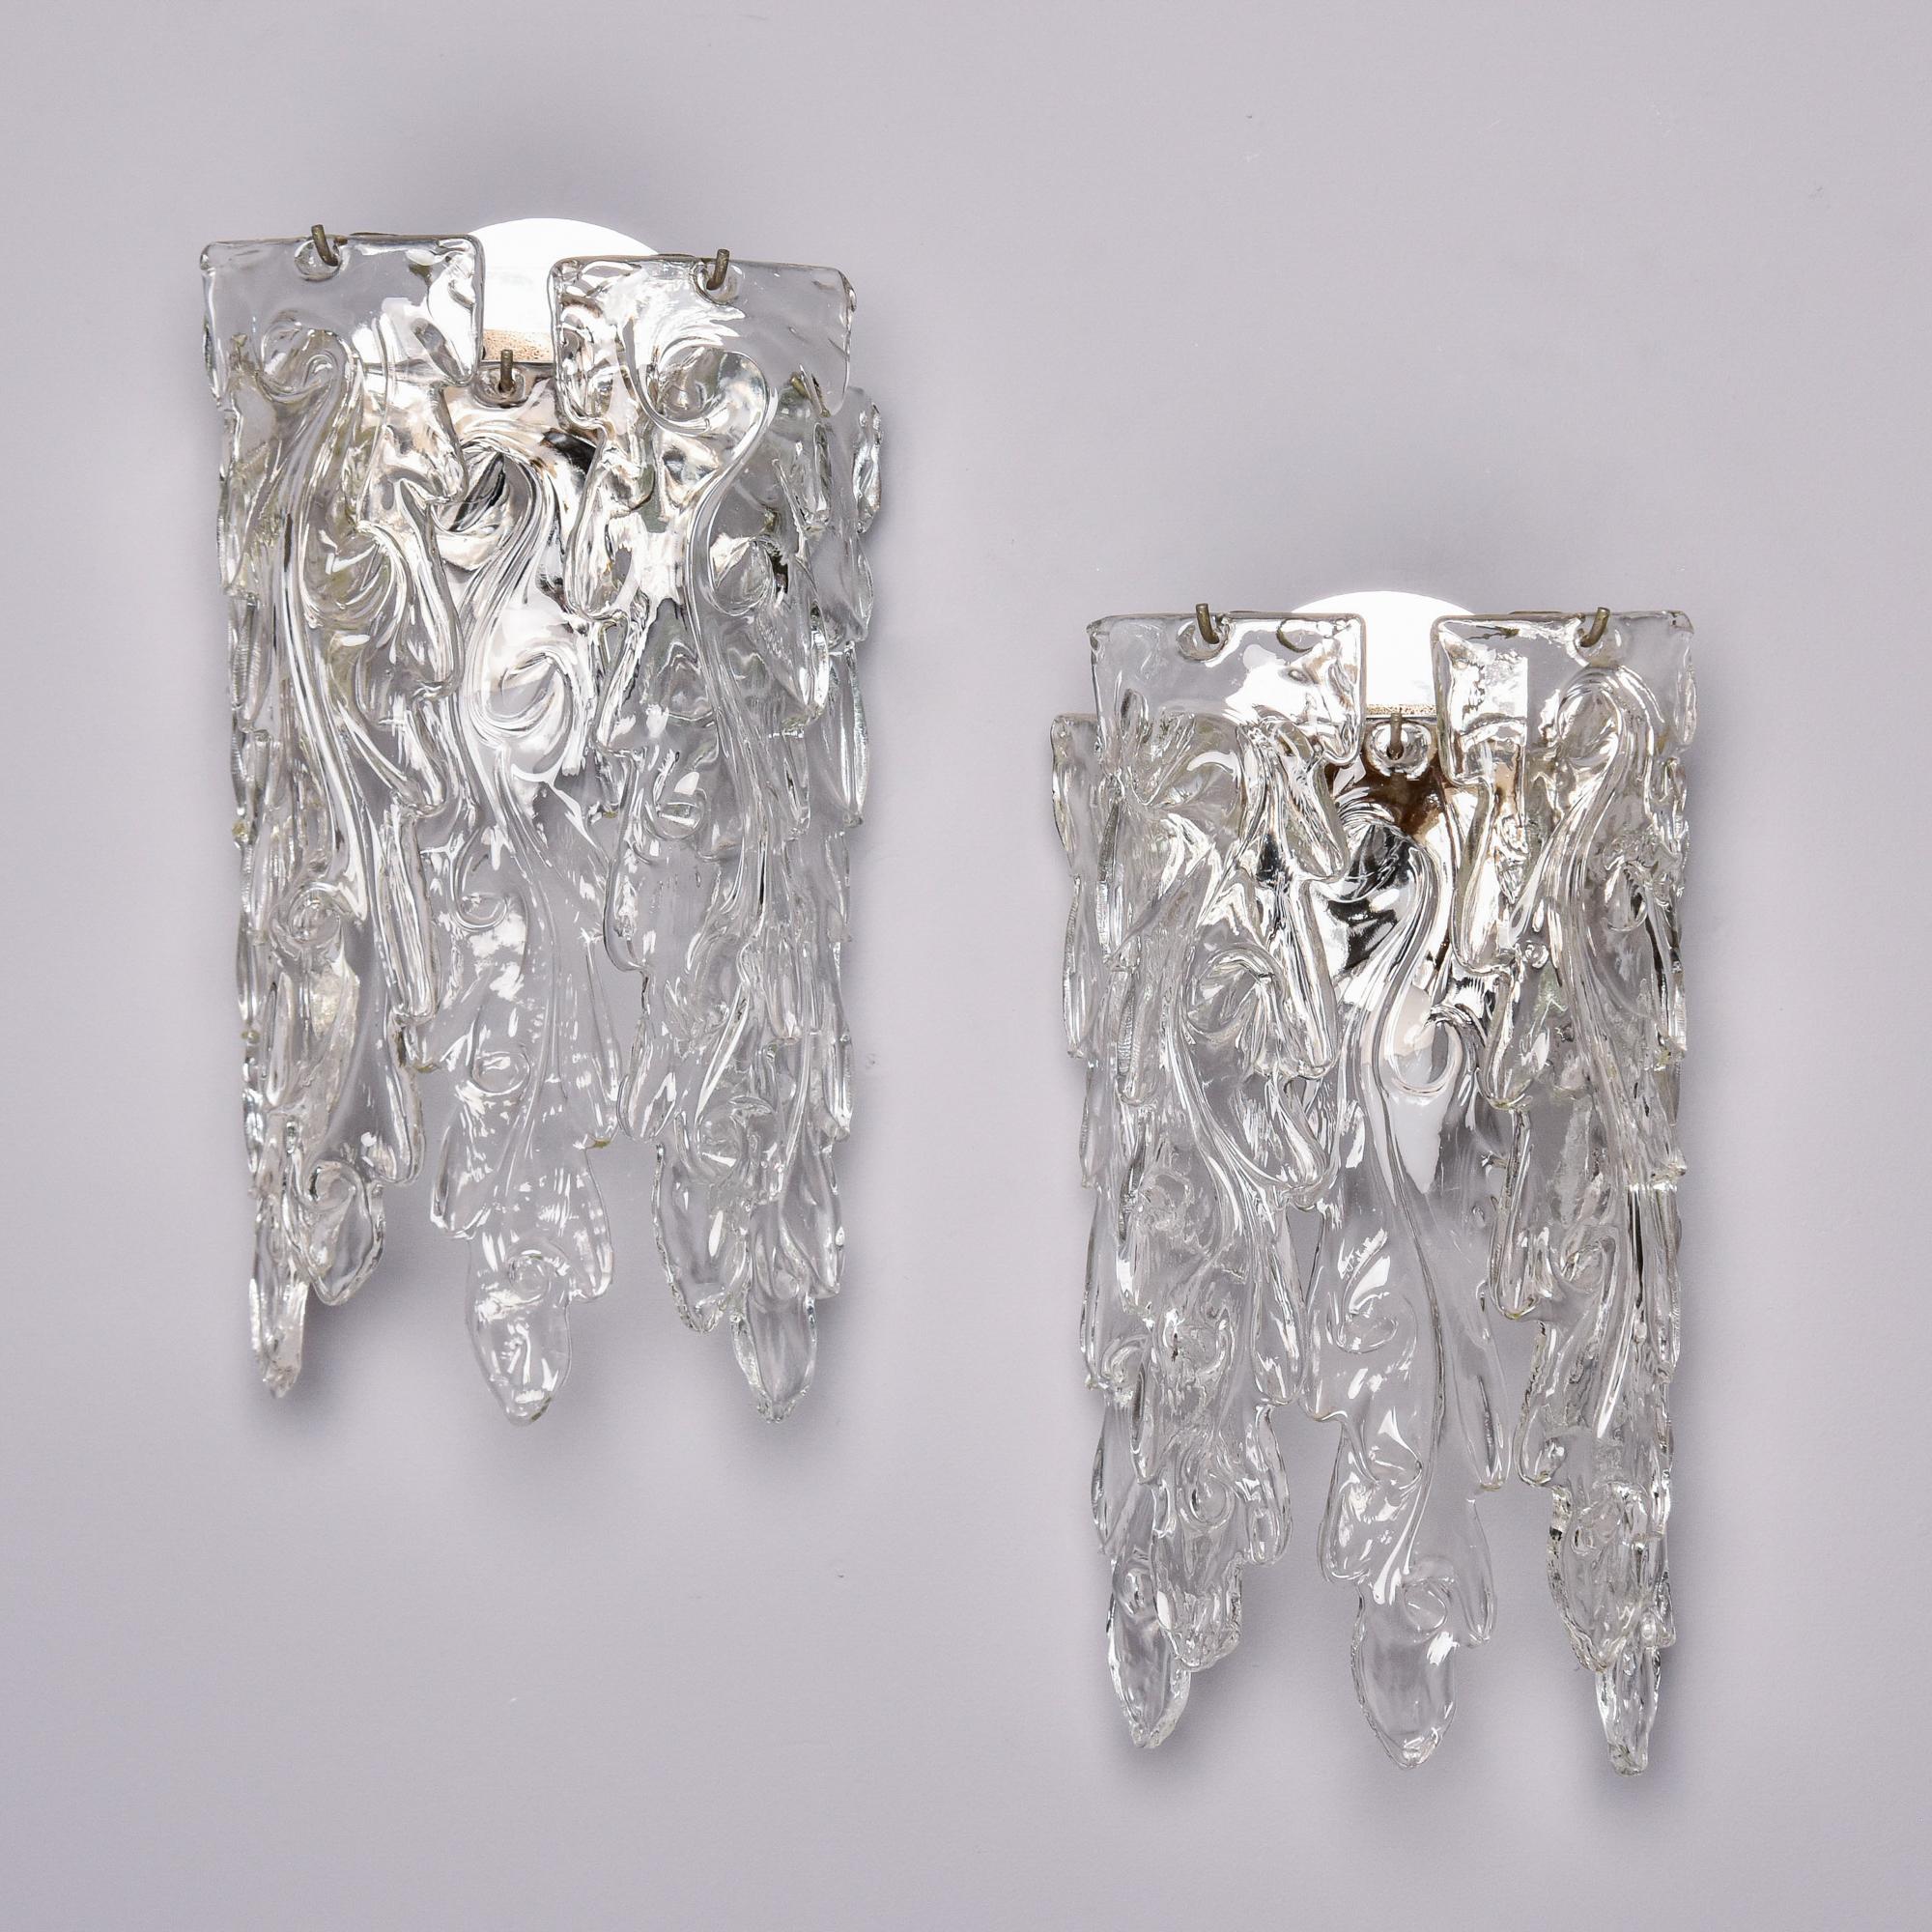 Found in Italy, this pair of Barovier-attributed Murano glass sconces date from approximately 1970. Each sconce has one internal candelabra-sized socket and four, heavy clear textured glass pendants that surround the socket and are suspenced from a